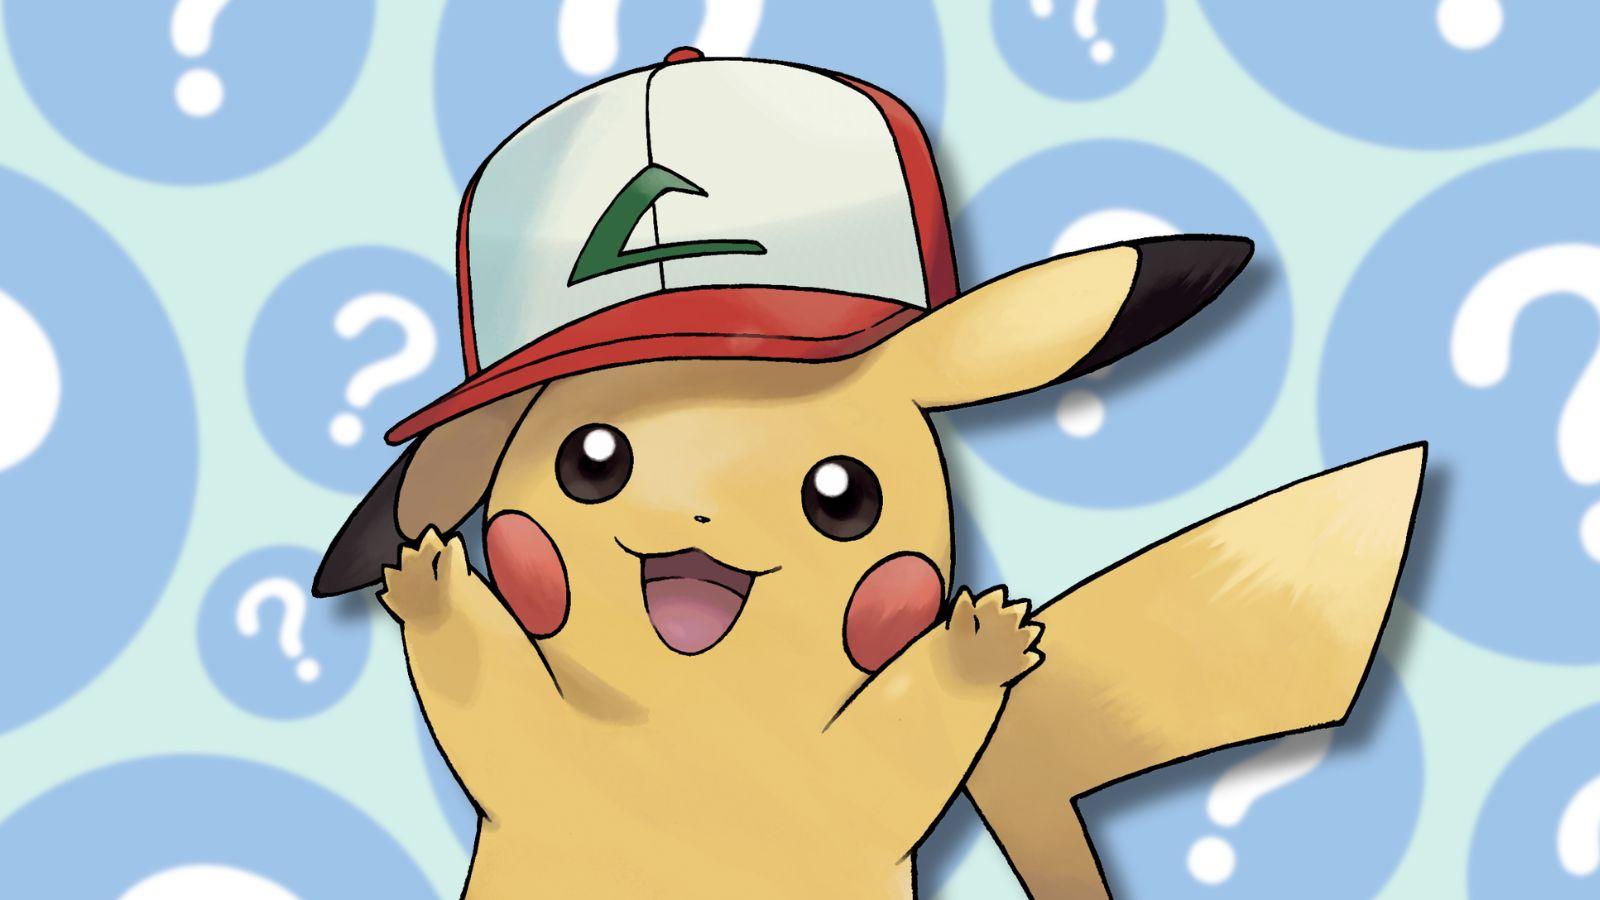 Pikachu with hat and question marks behind it.